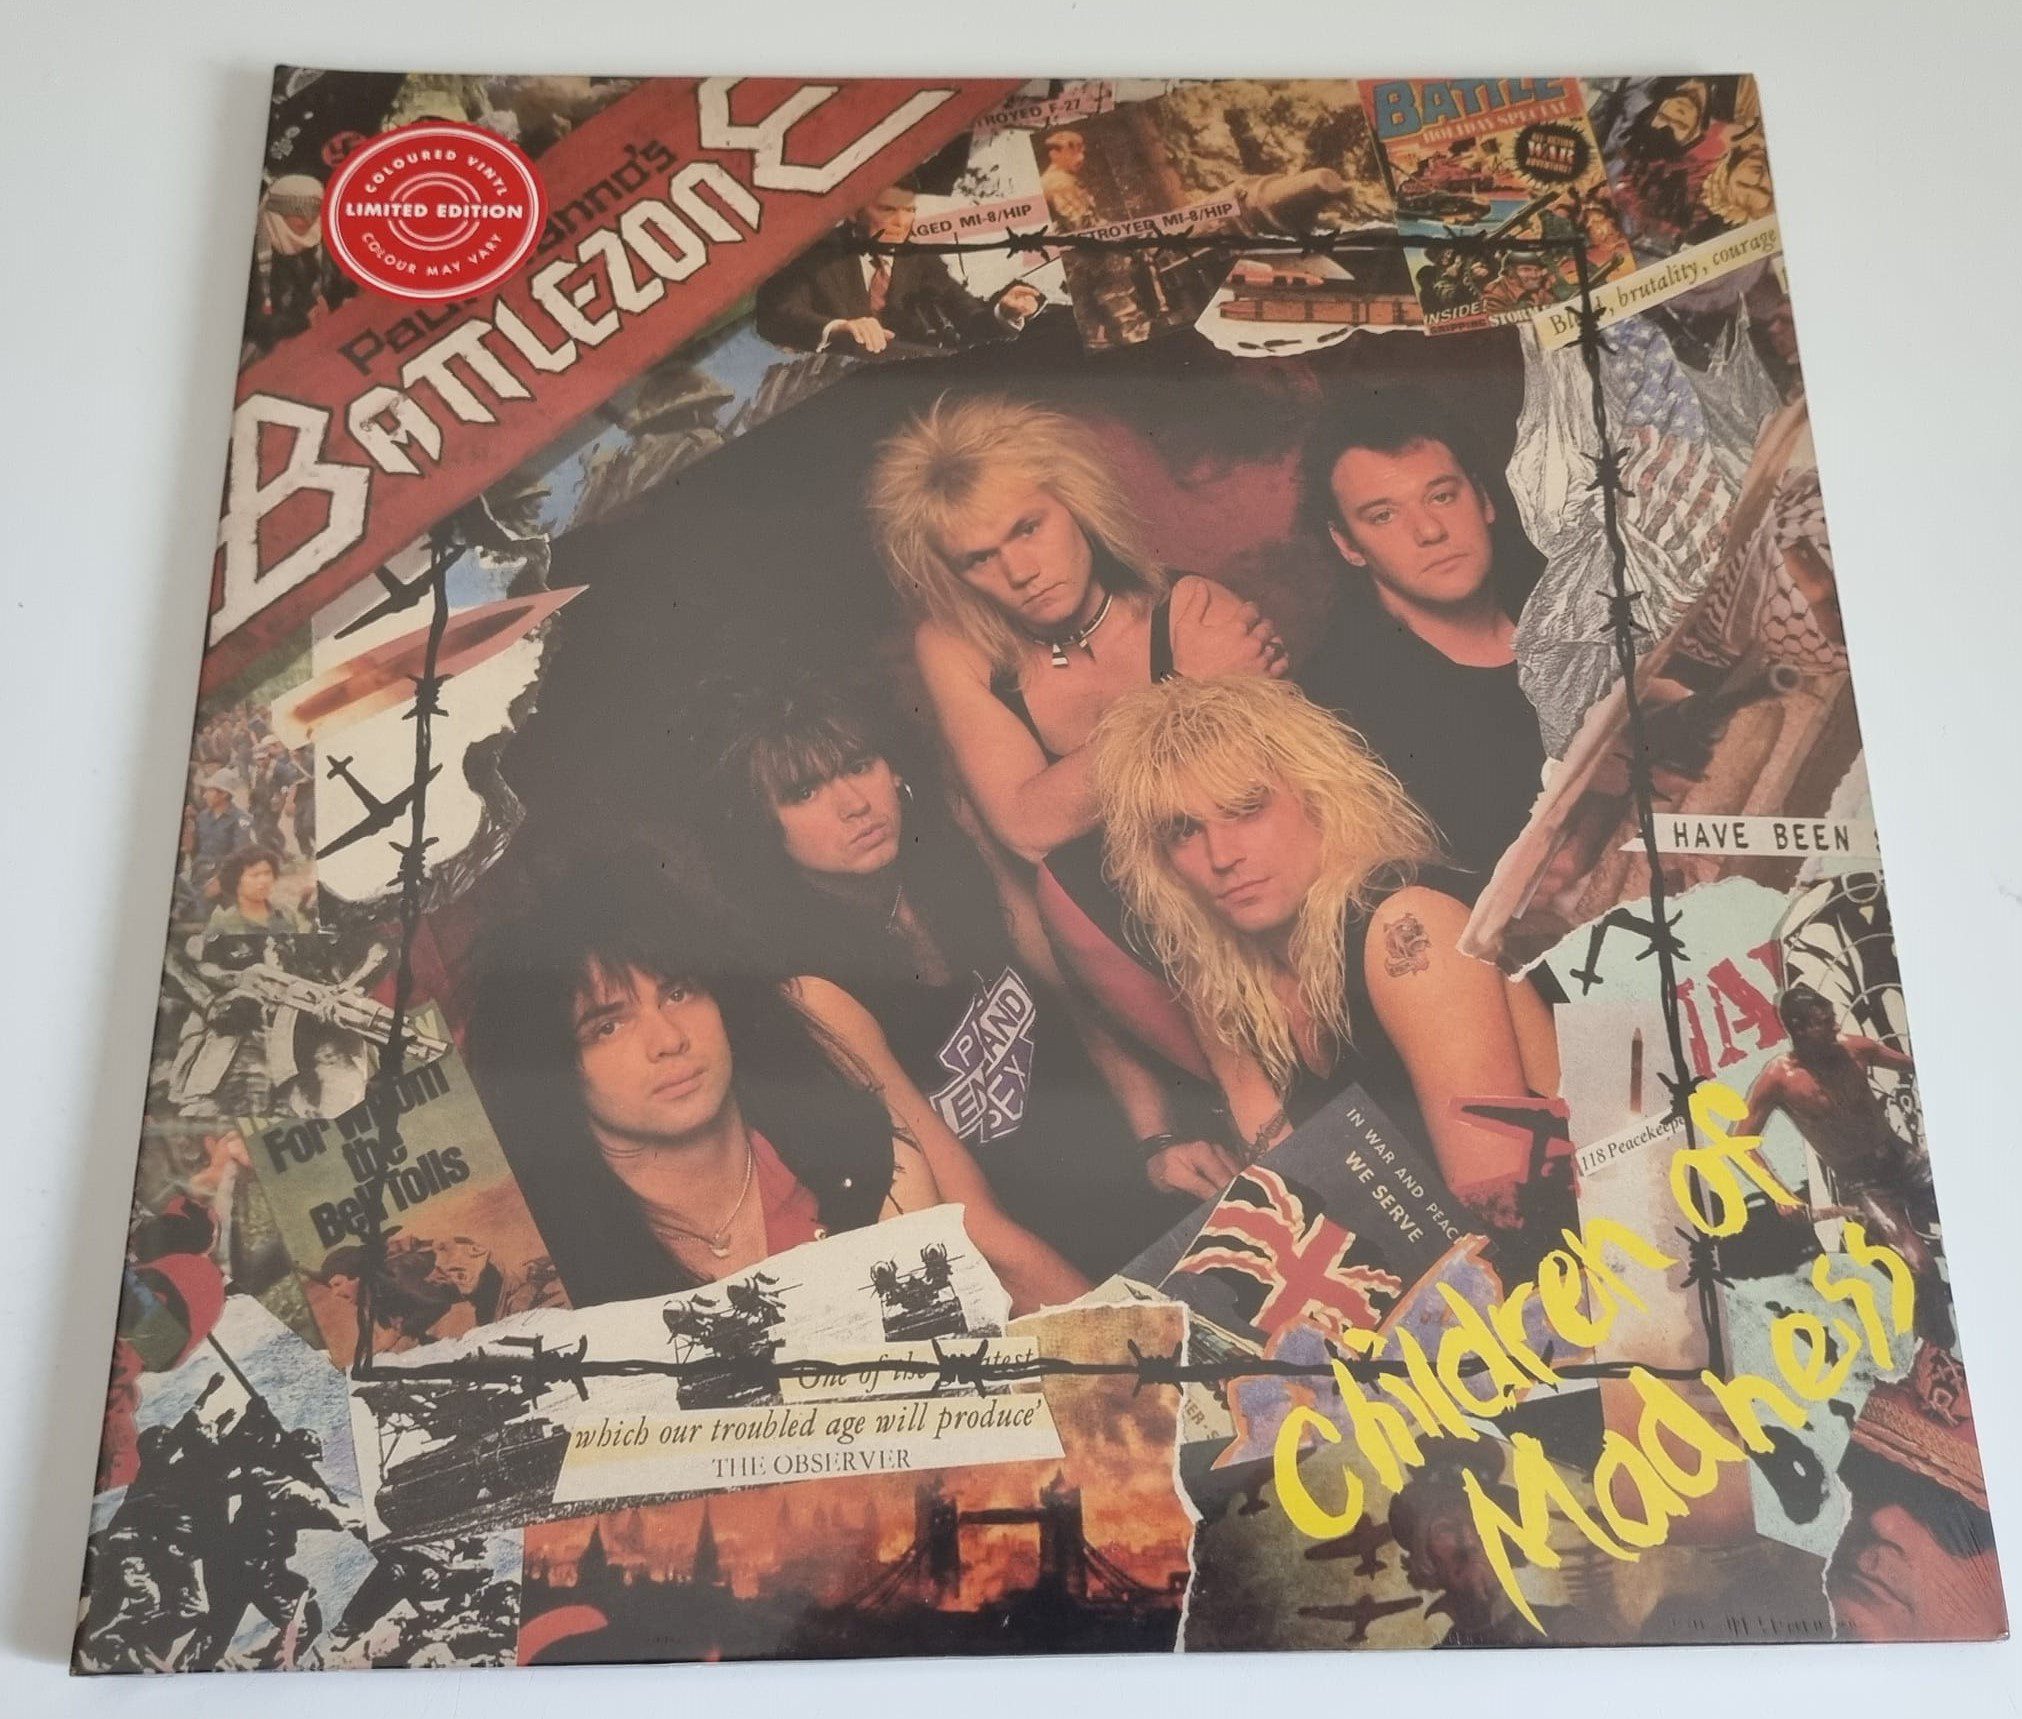 Buy this rare Paul Di' Anno record by clicking here